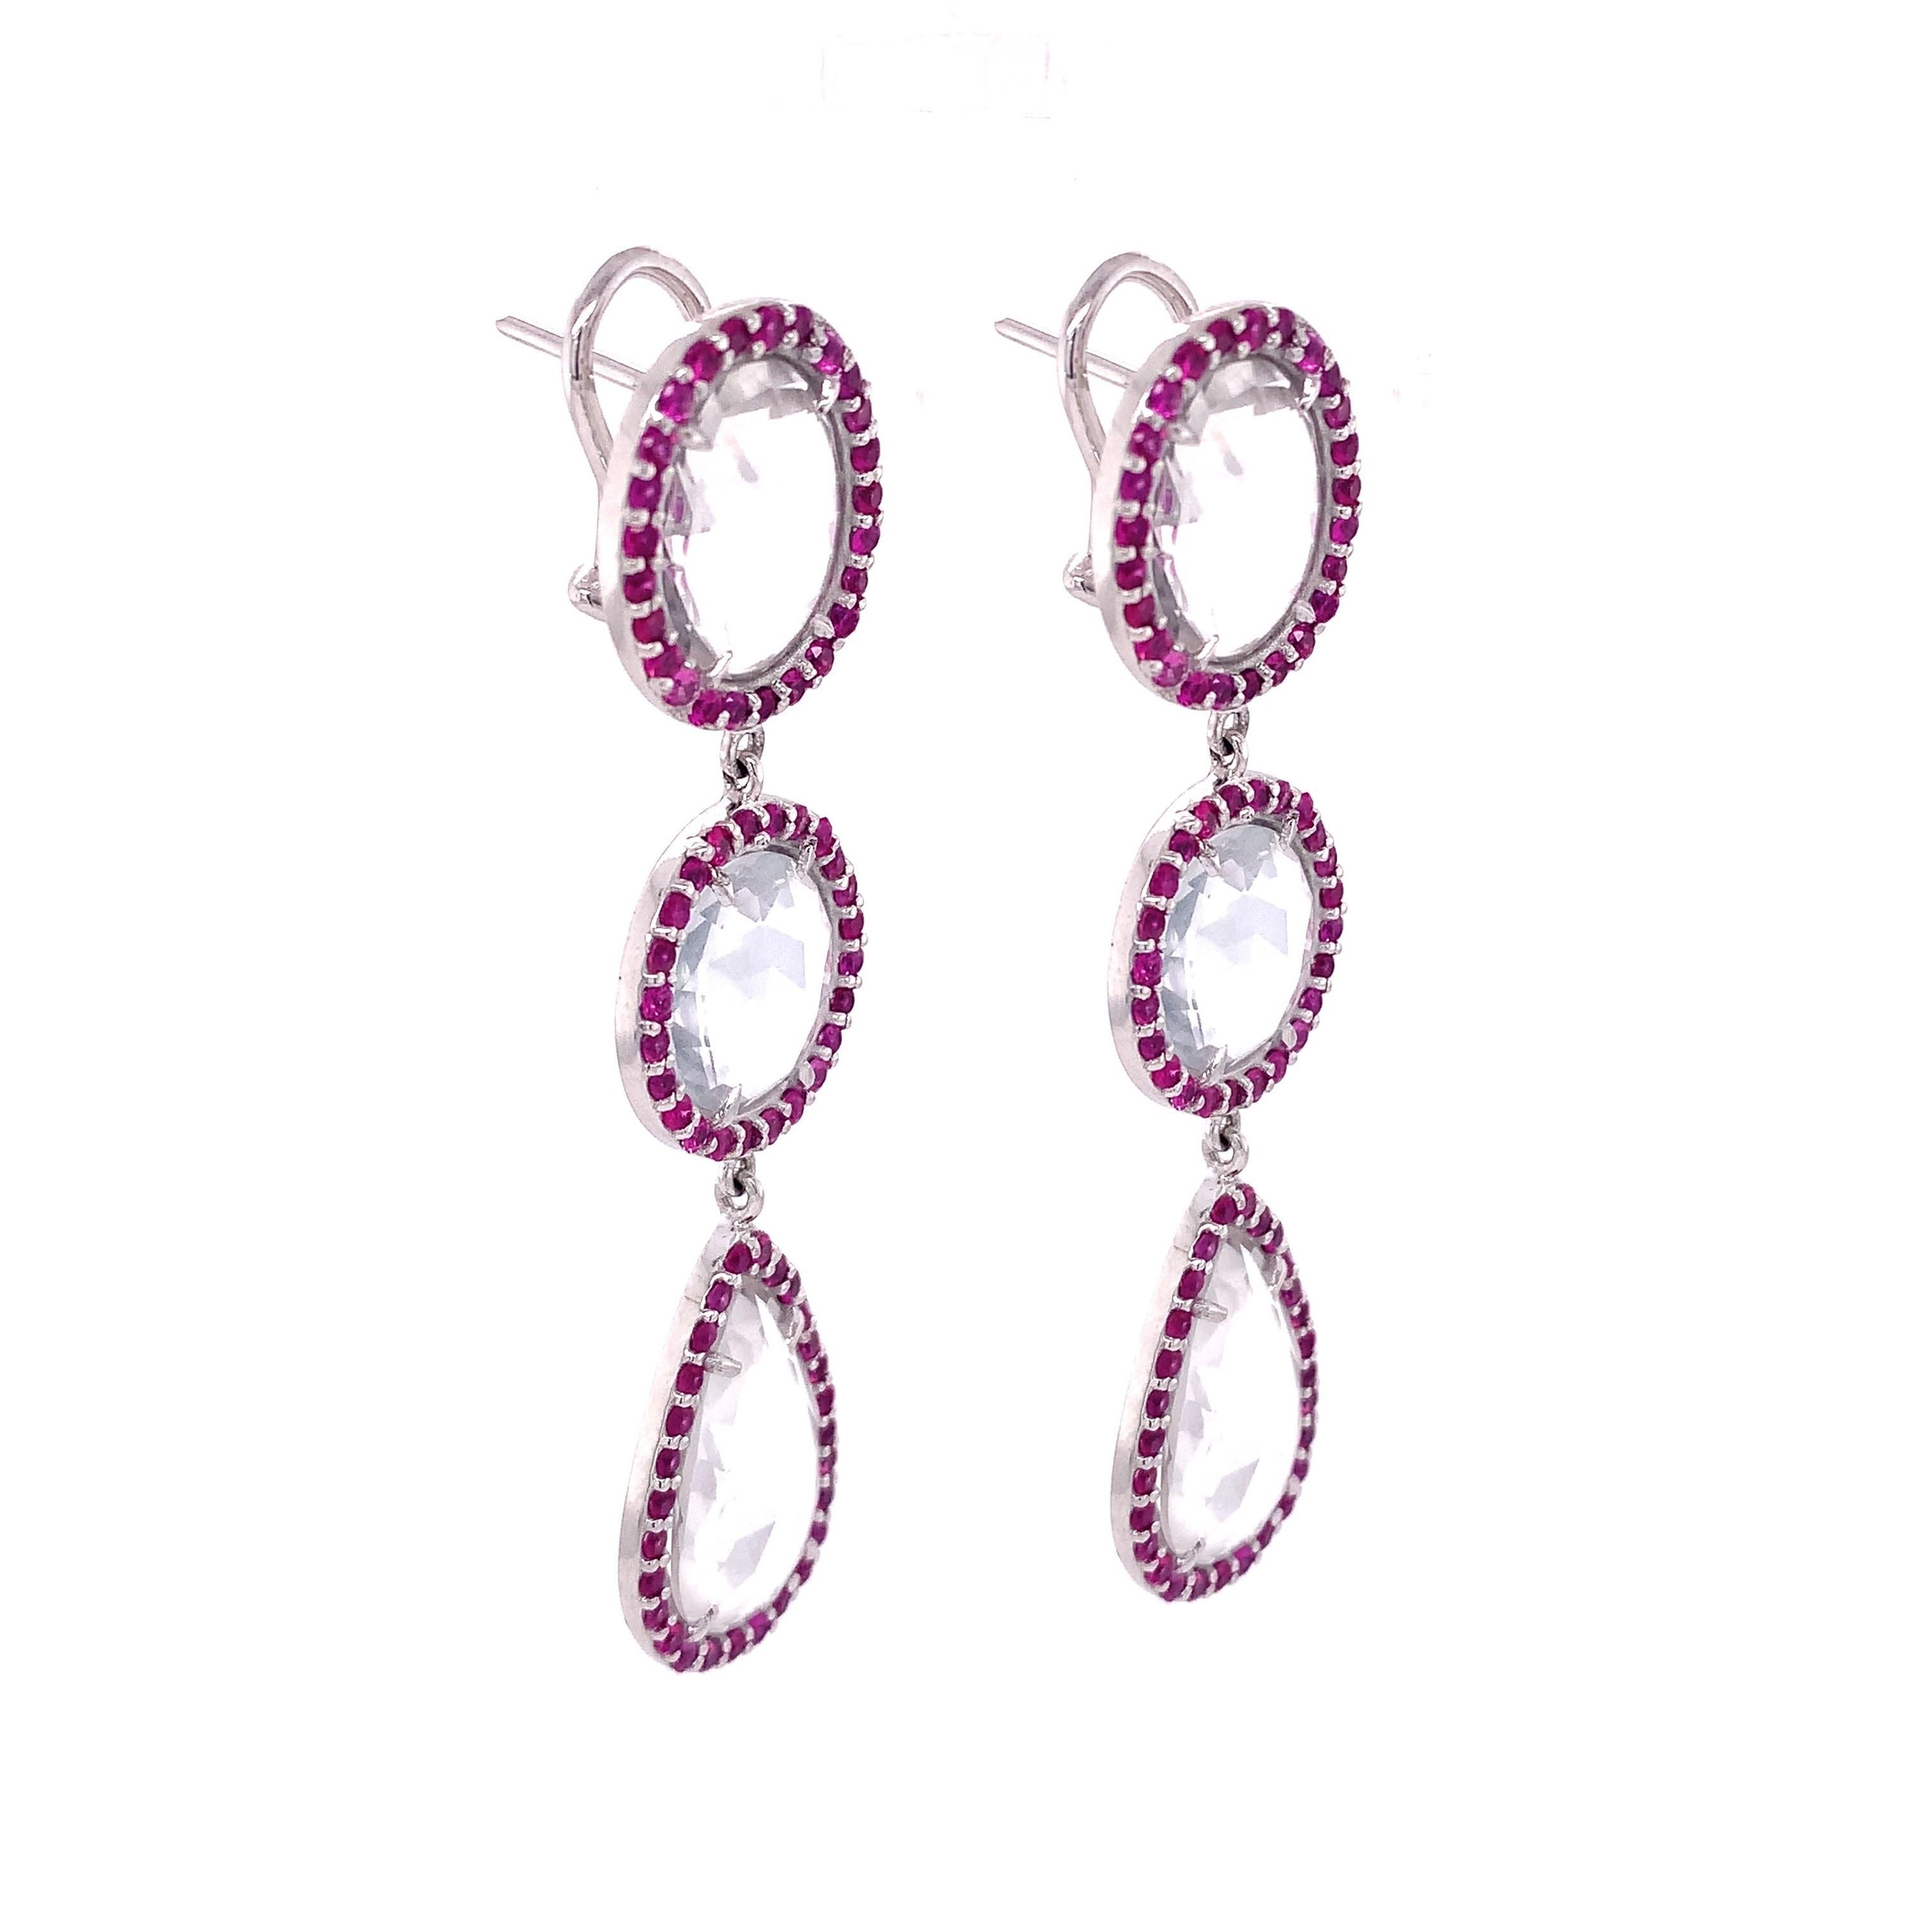 Life in color Collection

Different shape of white Topaz accented by very bright pink Sapphire halo triple drop earrings set in Sterling Silver. 

Moonstone: 21.44 ct total weight.
Pink Sapphire: 2.82 ct total weight.